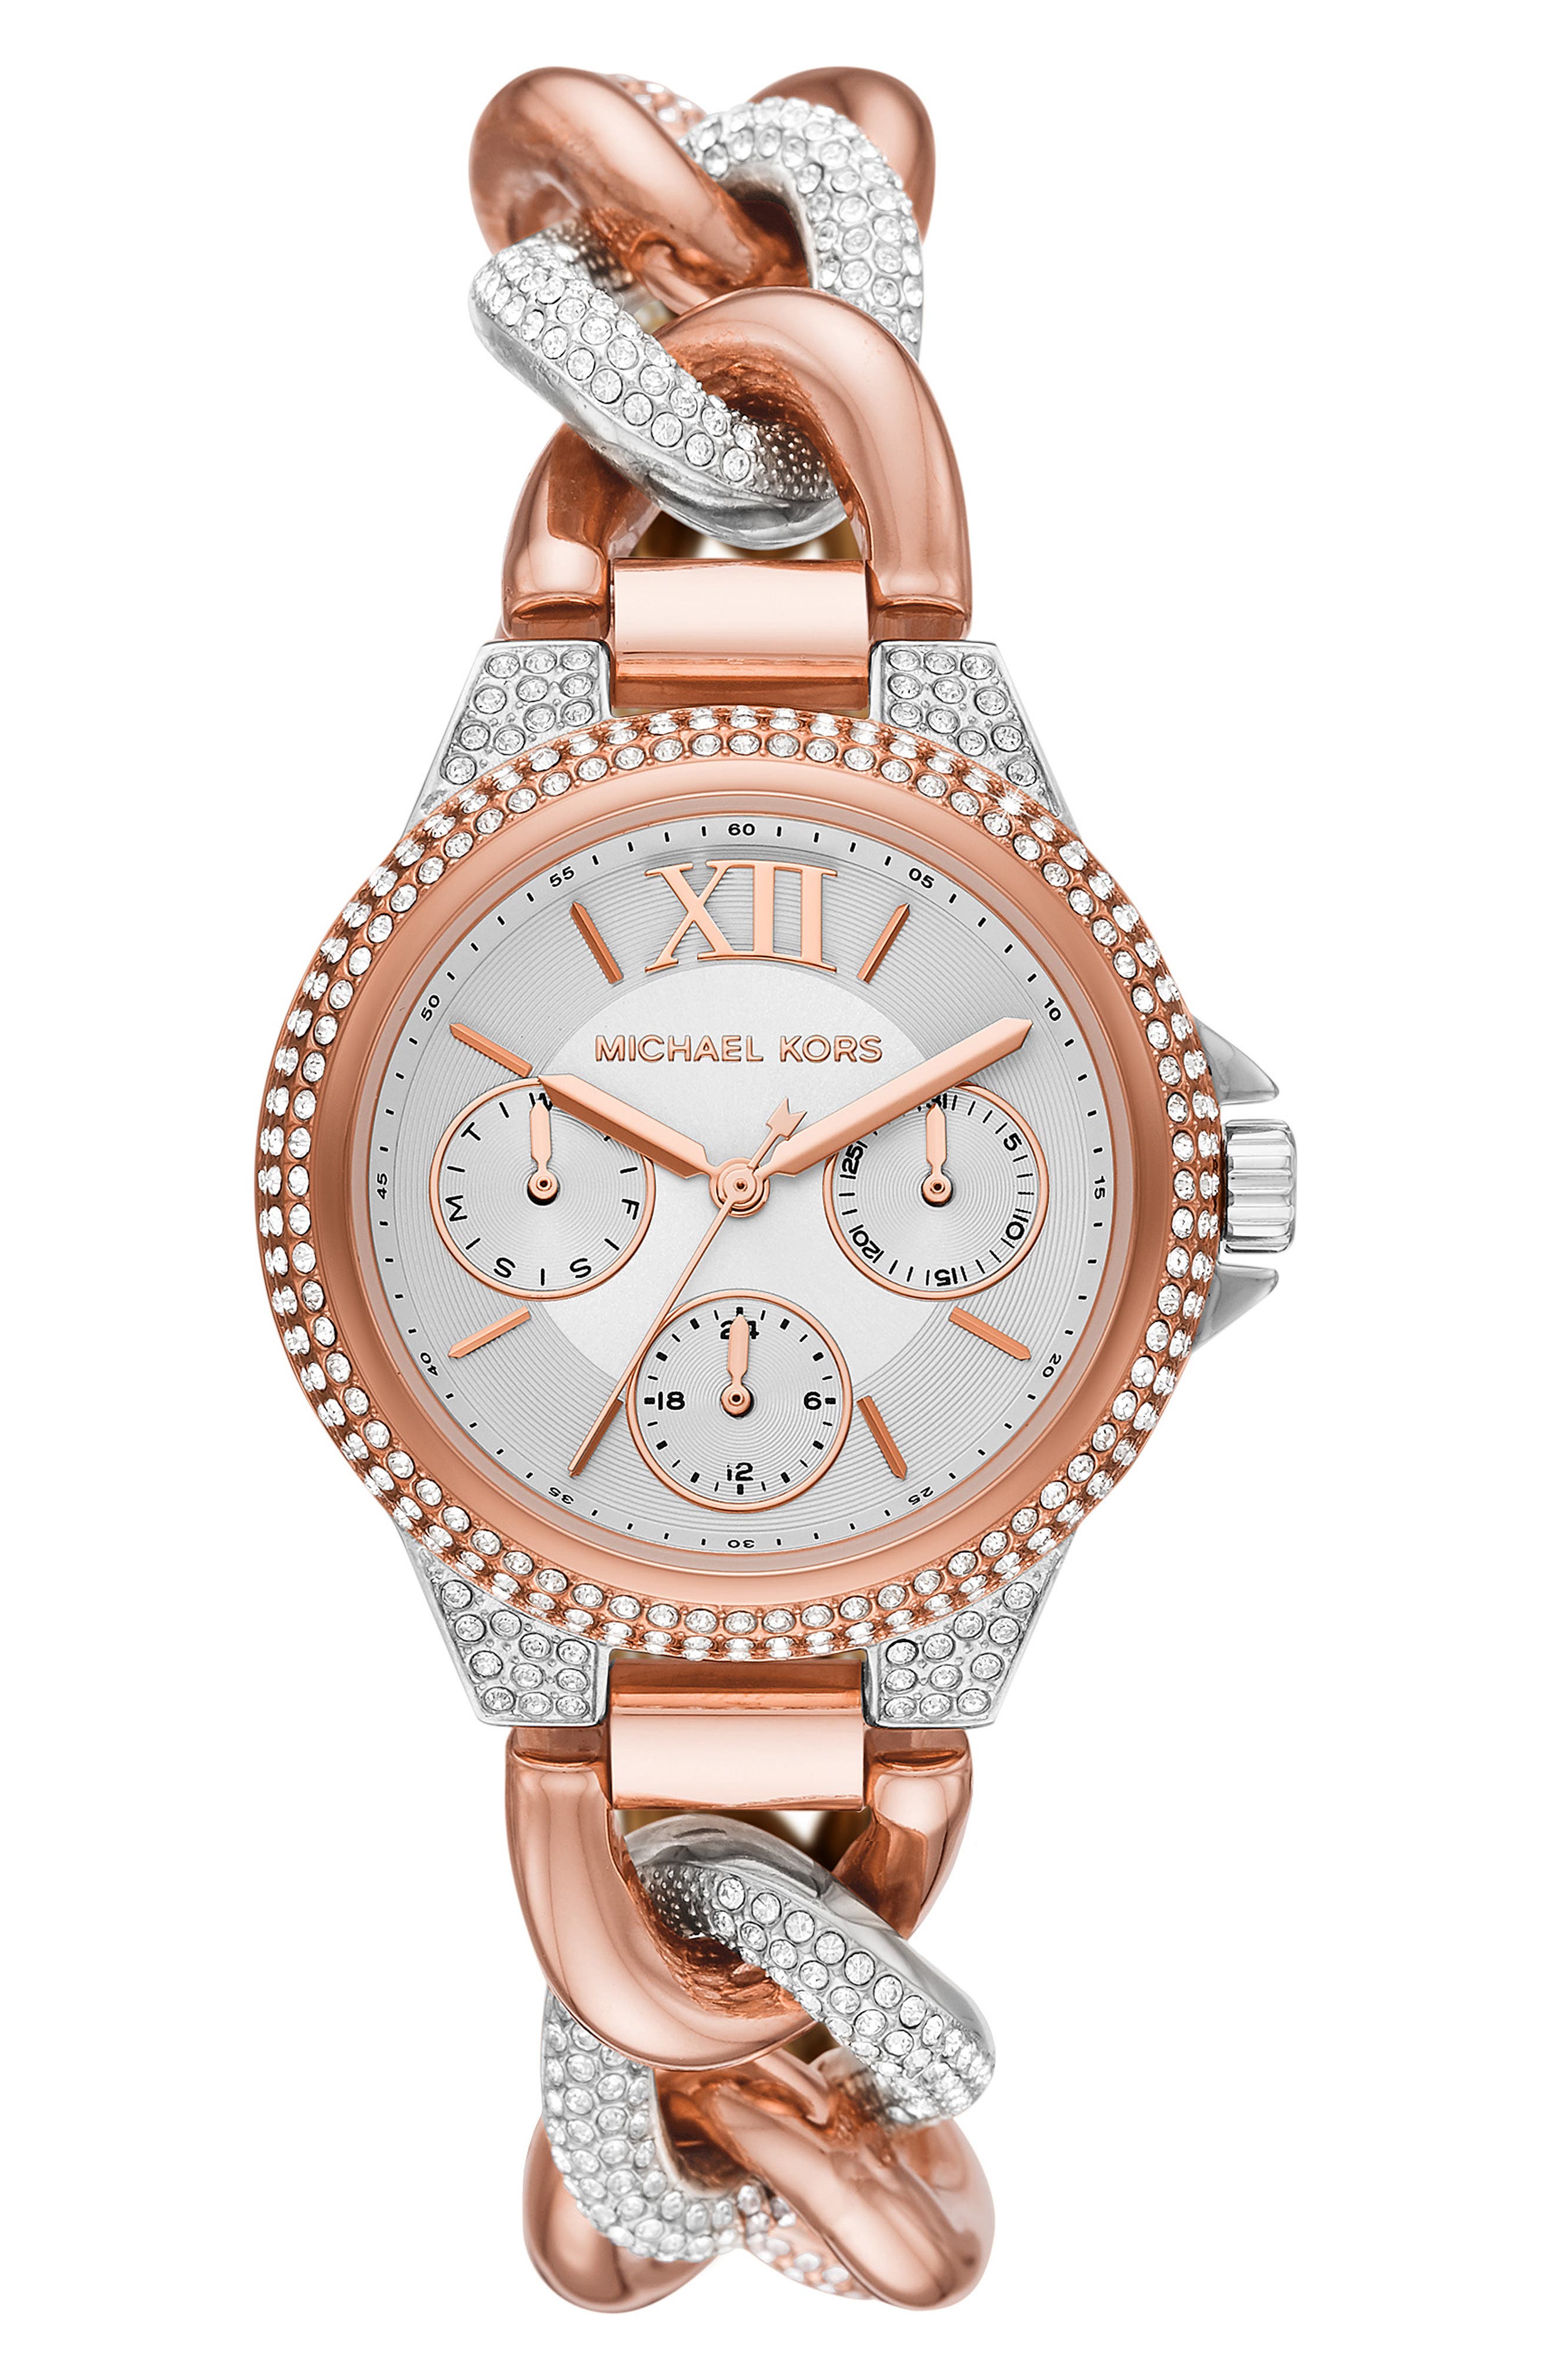 is michael kors watches a good brand